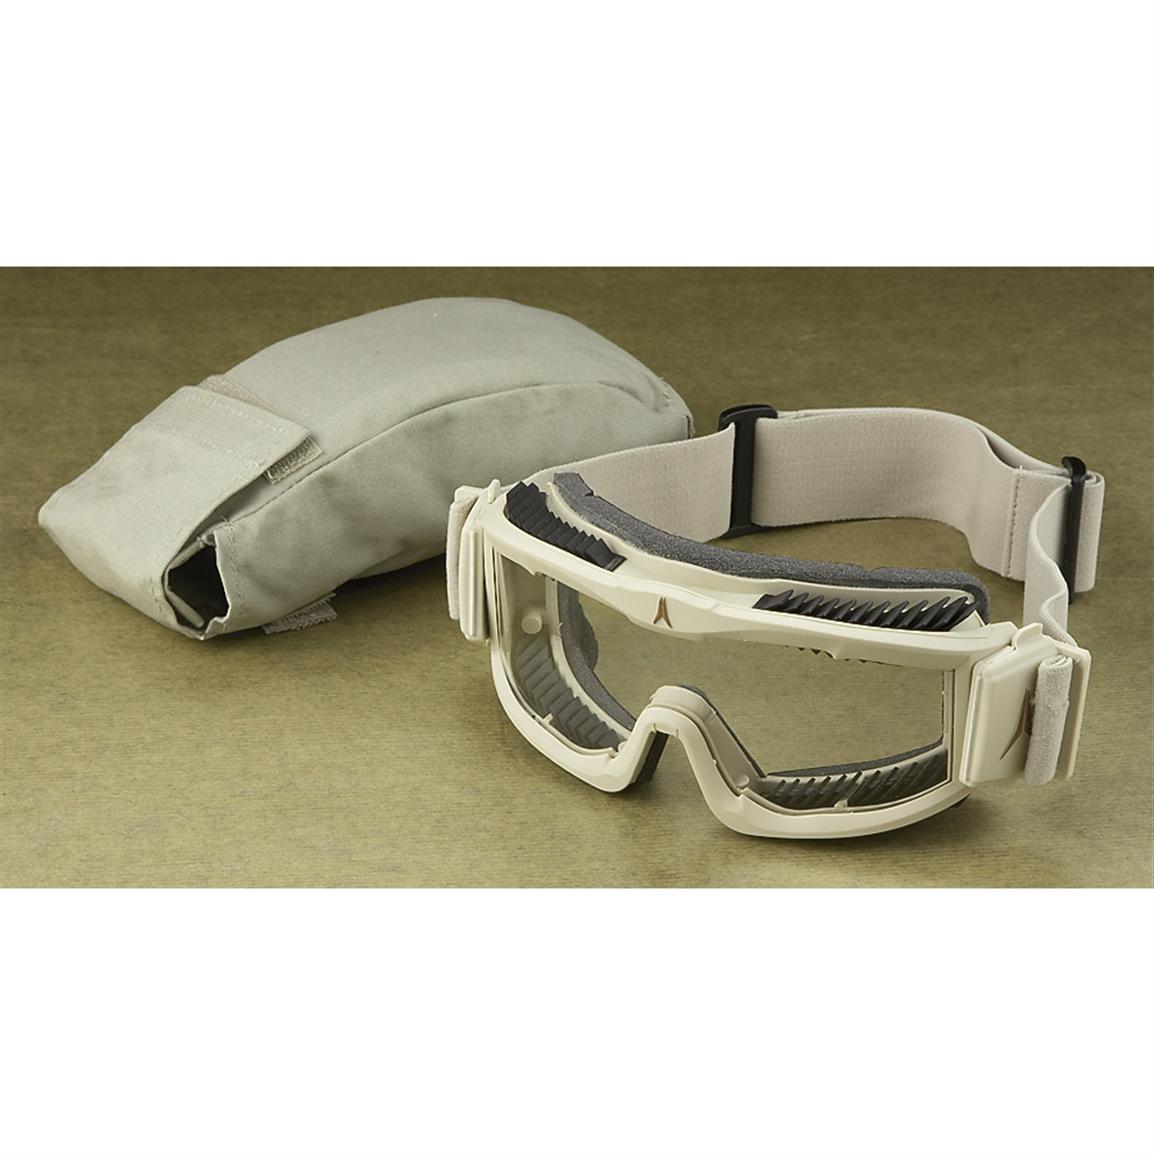 New U S Military Ballistic Goggles 172639 Goggles And Eyewear At Sportsman S Guide